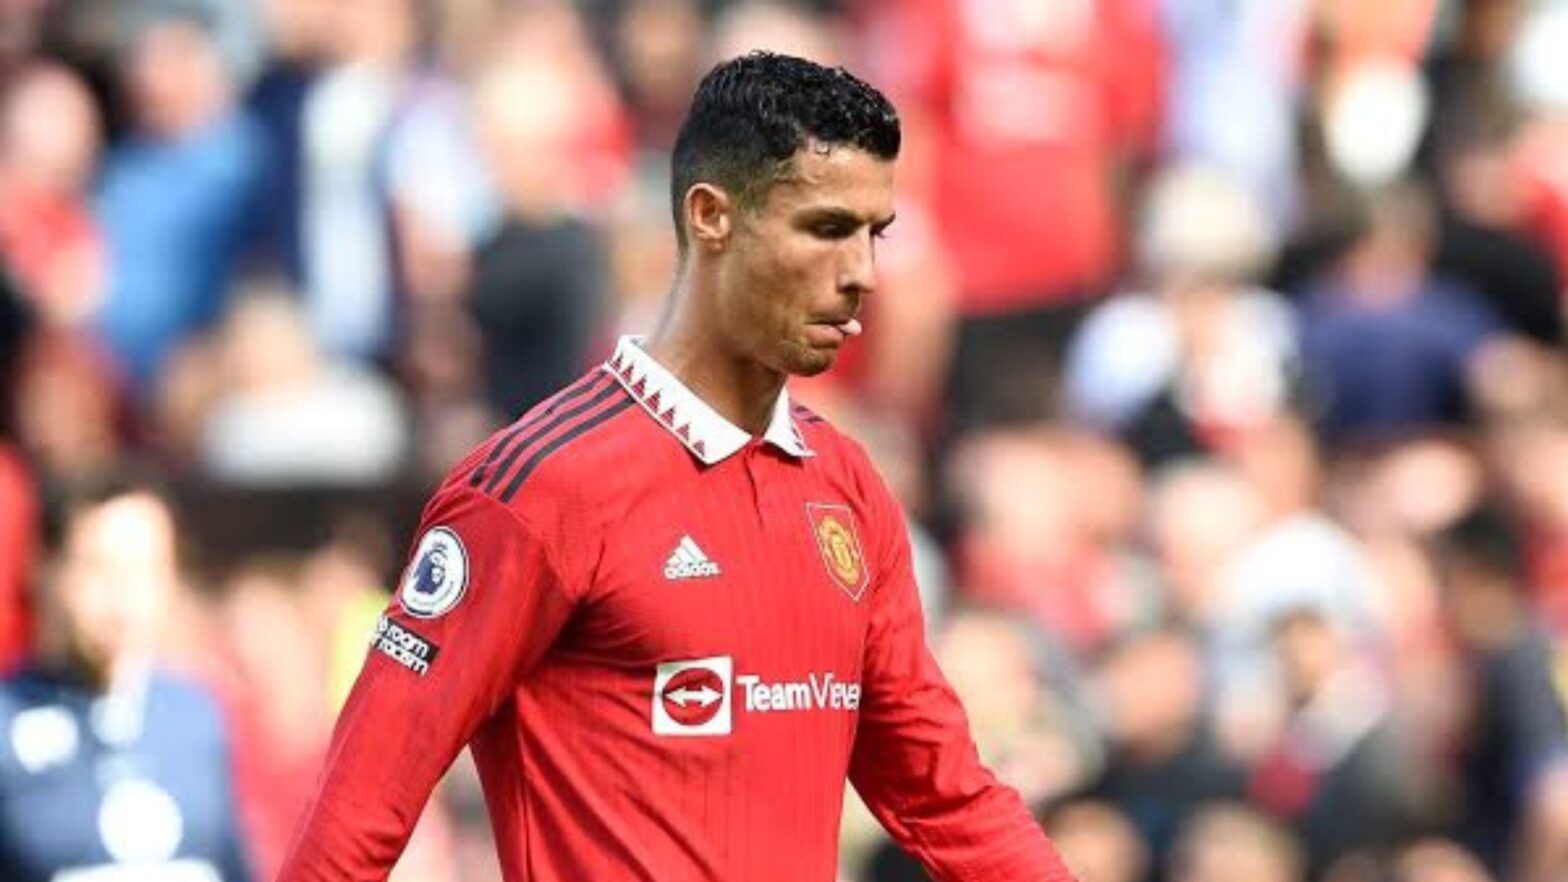 “Suck my big black c*ck,” Derek Chisora Lashes Out At Manchester United For Benching Cristiano Ronaldo